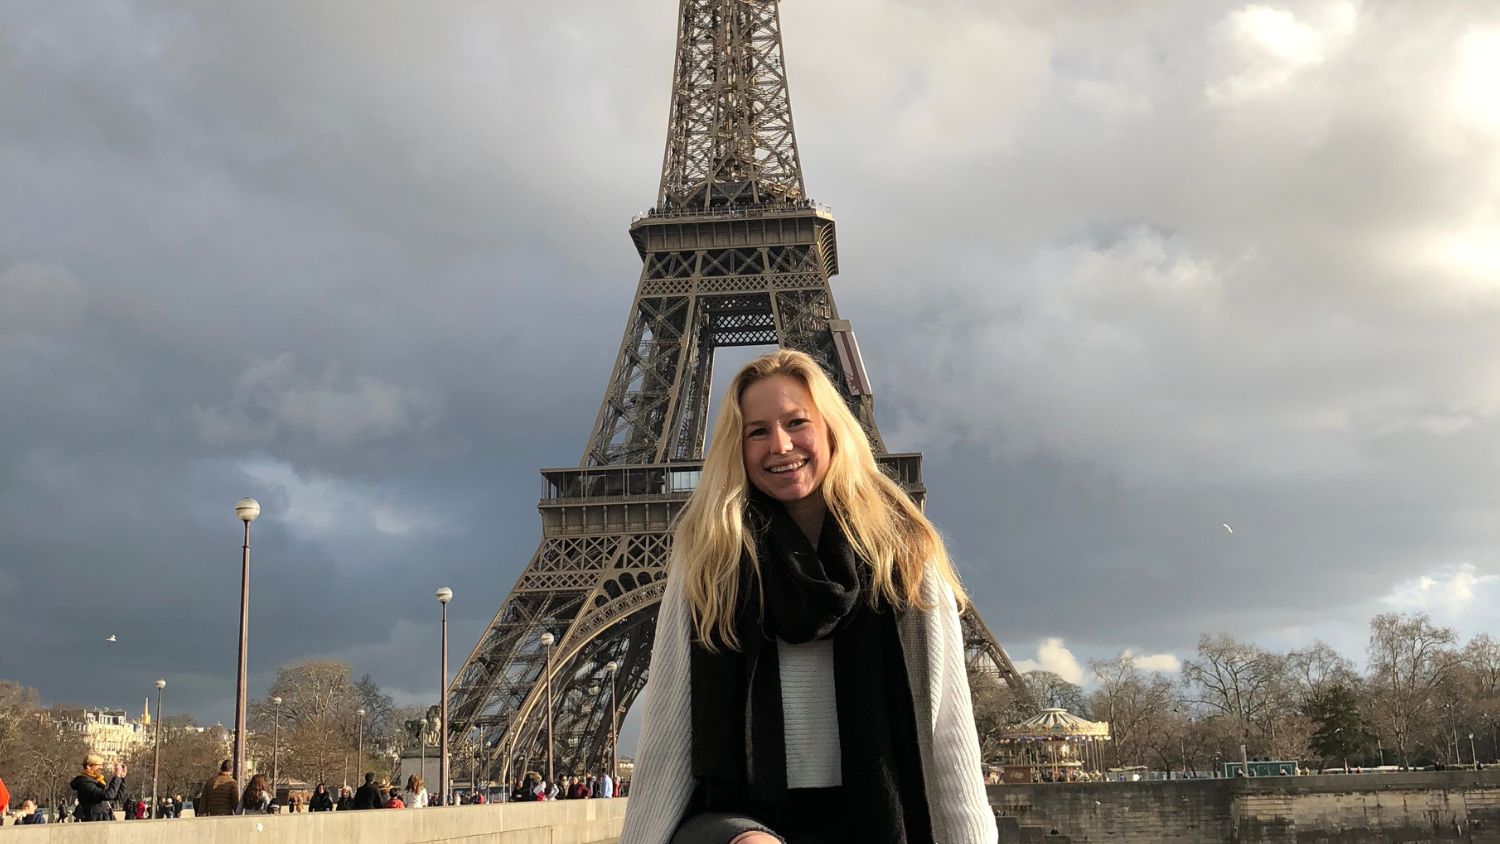 A student, Anastasia, in front of Eiffel Tower